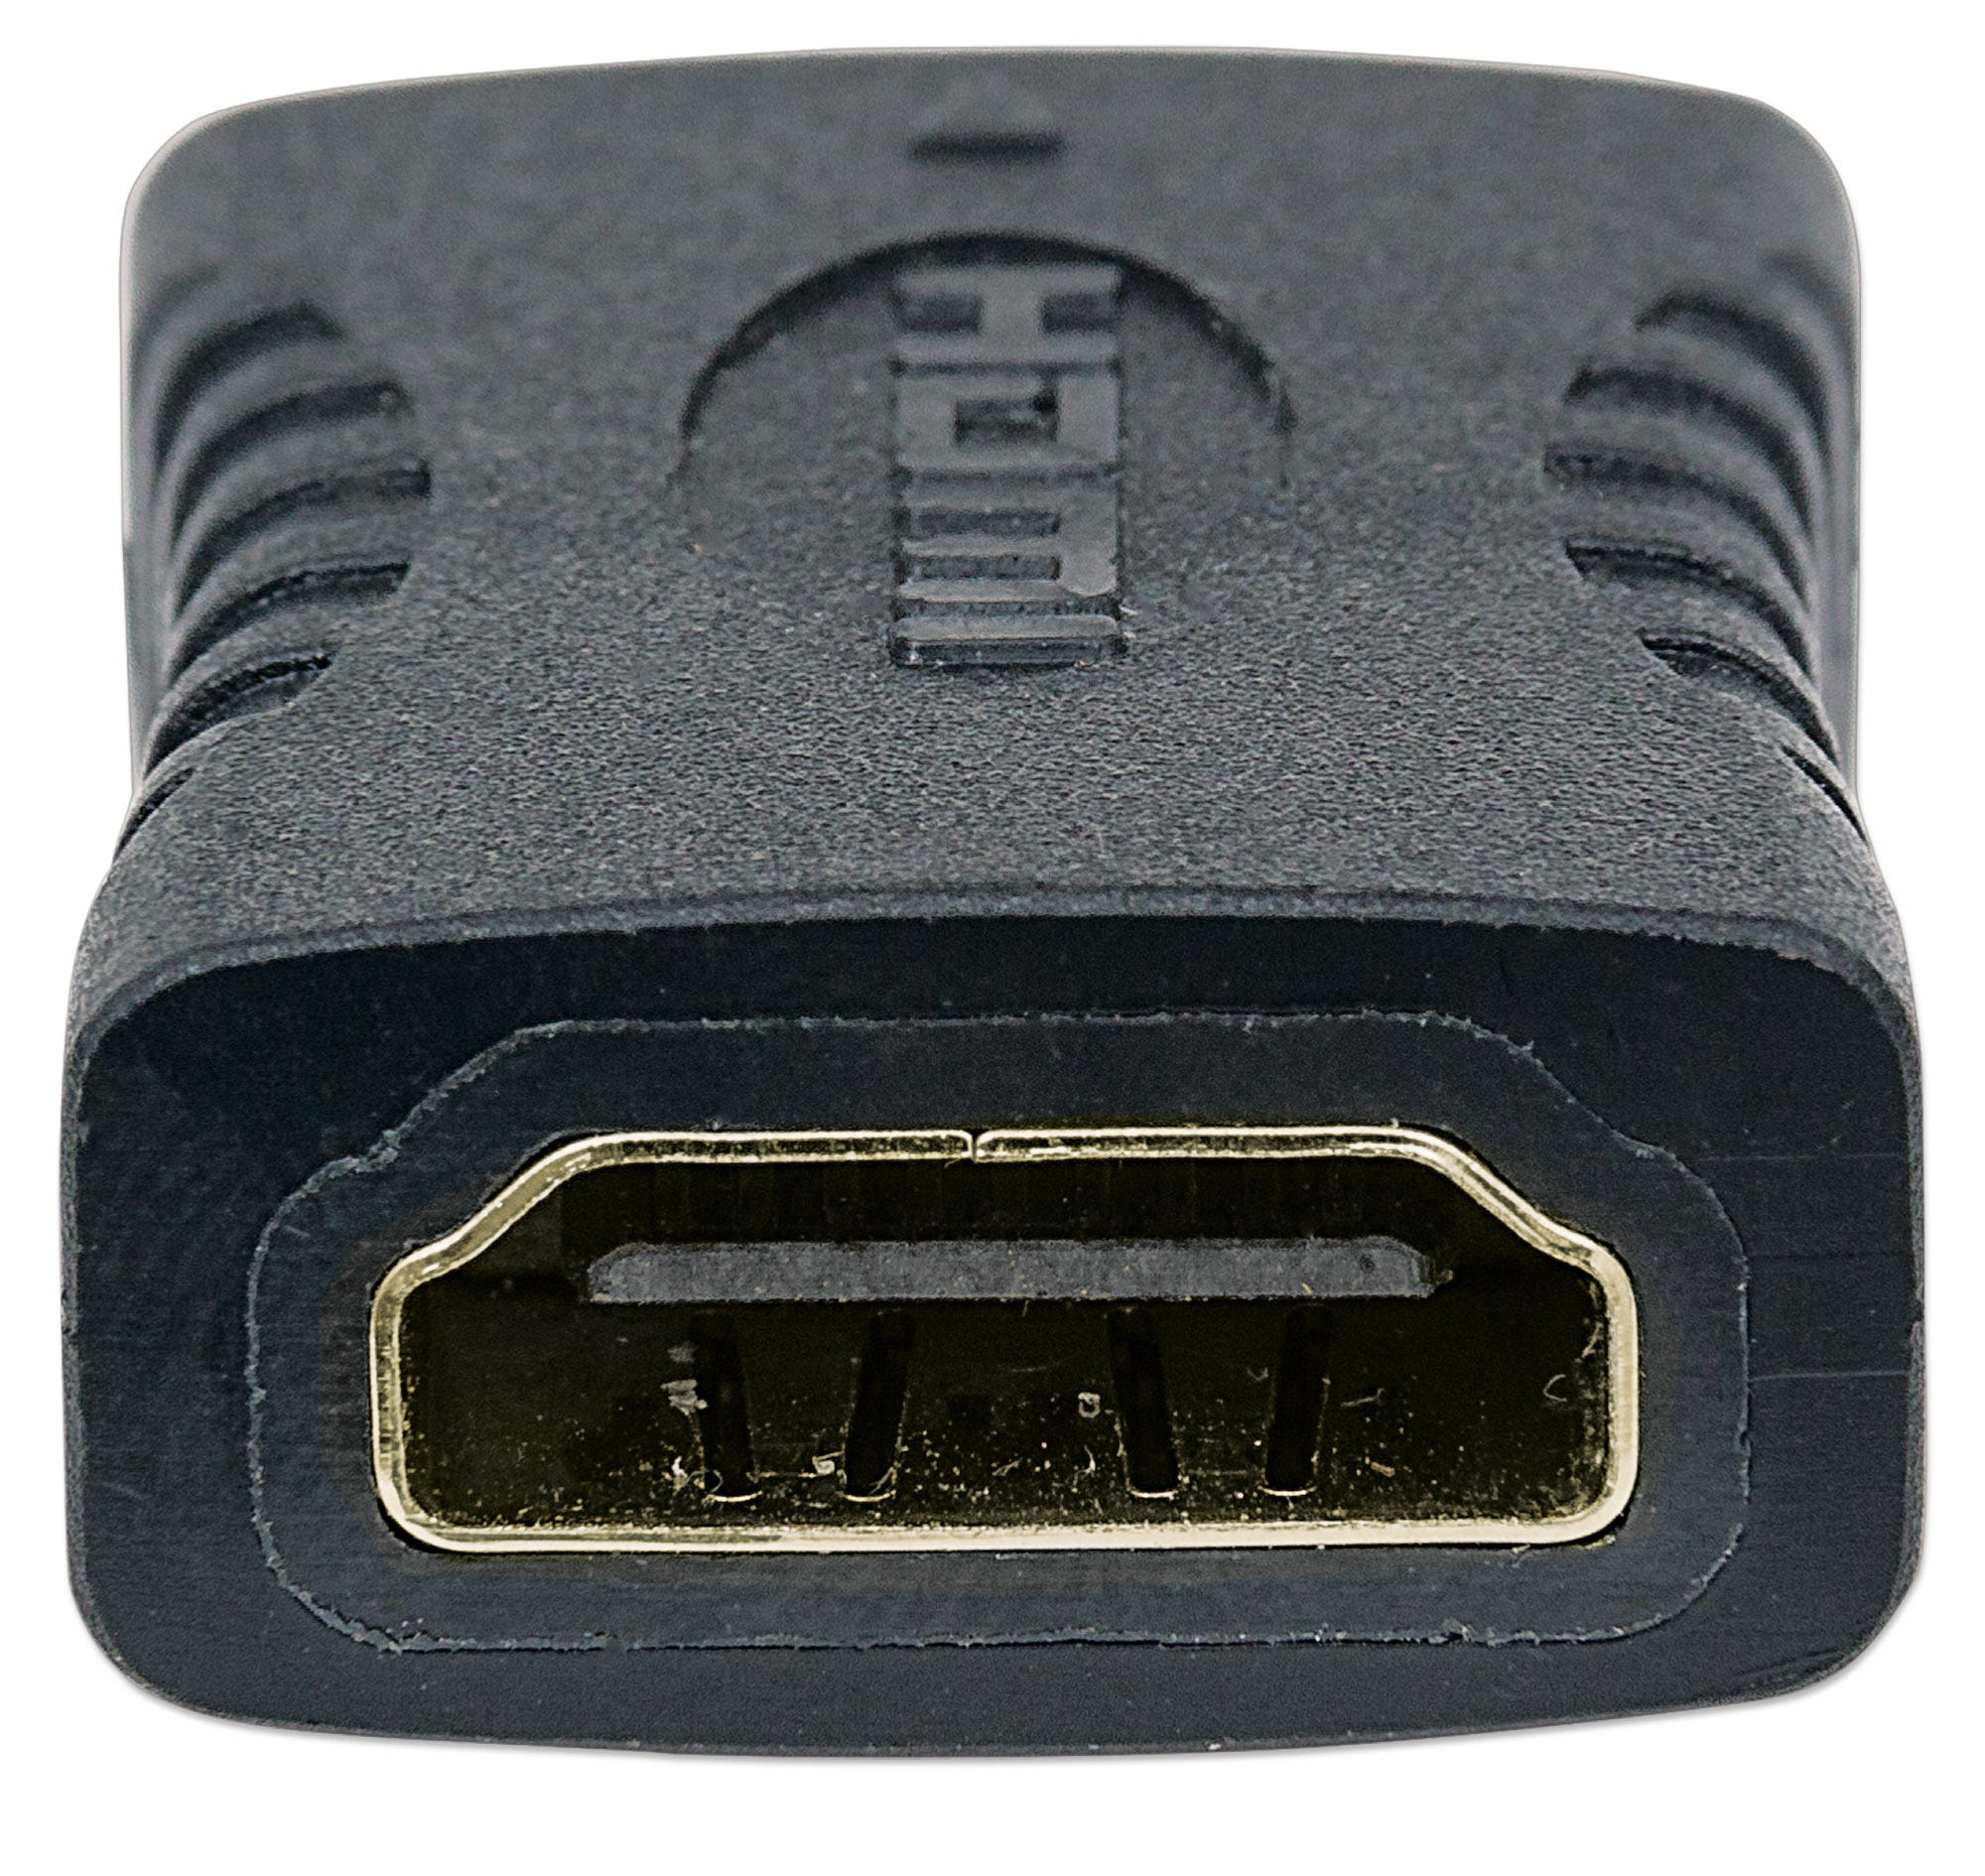 Manhattan HDMI Coupler, 4K@60Hz (Premium High Speed), Female to Female, Straight Connection, Black, Ultra HD 4k x 2k, 10.2 Gbps, ARC, 3D, Deep Colour, Fully Shielded, Gold Plated Contacts, Lifetime Warranty, Polybag